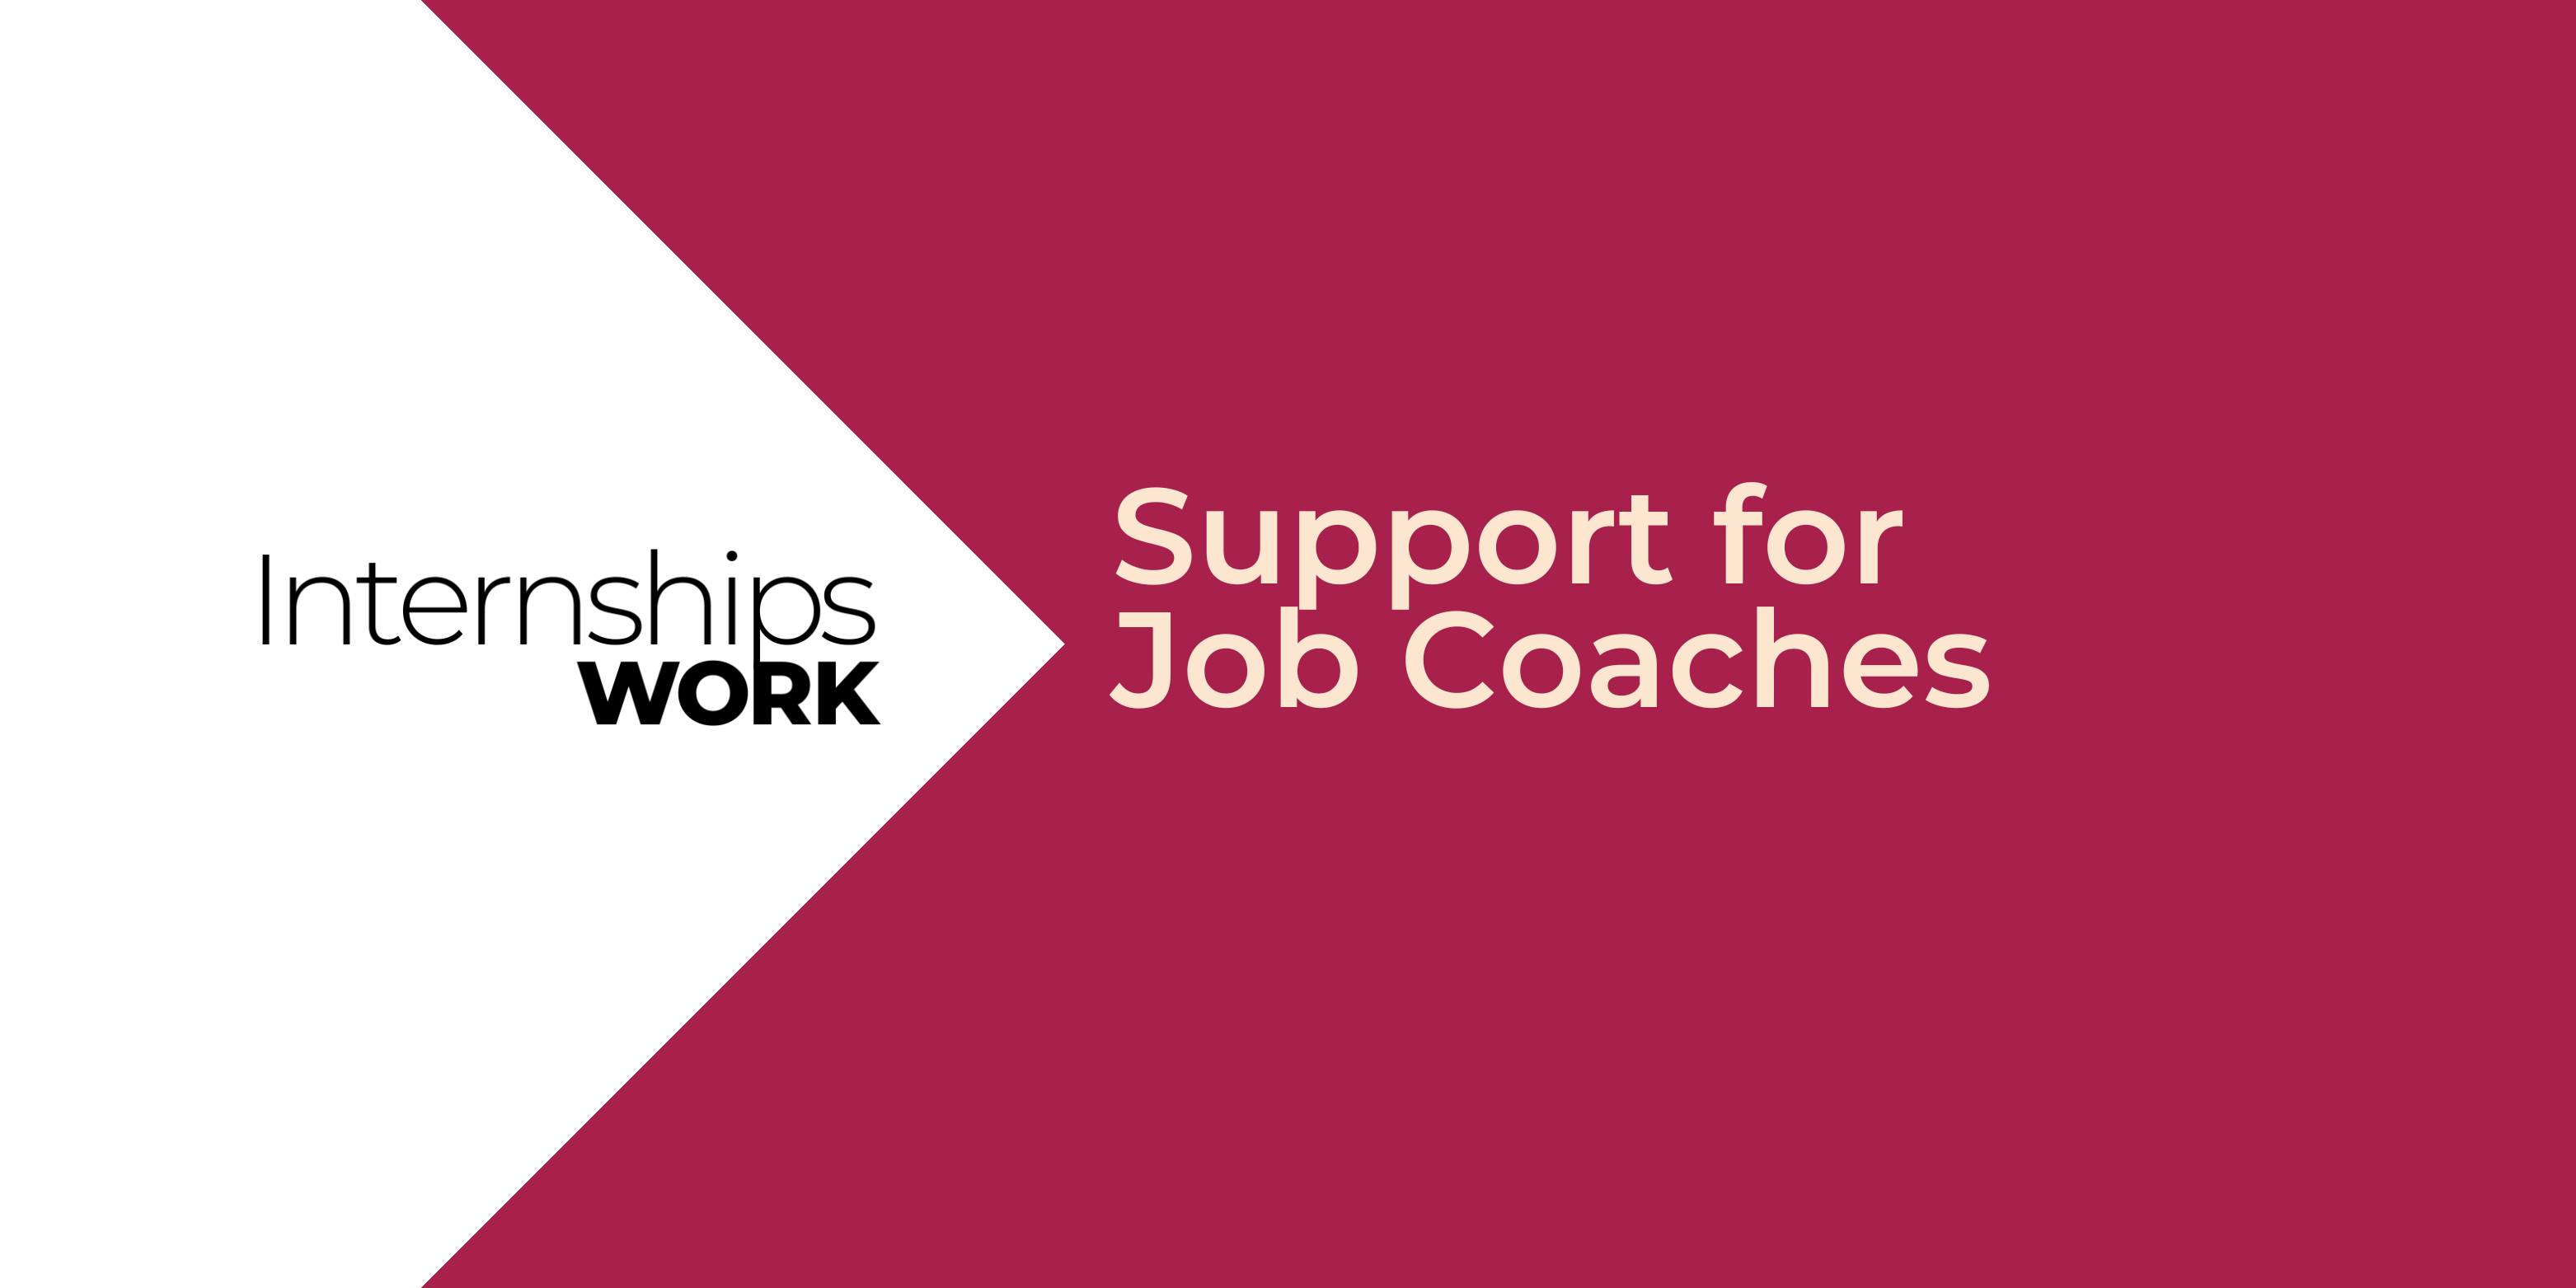 Support for Job Coaches